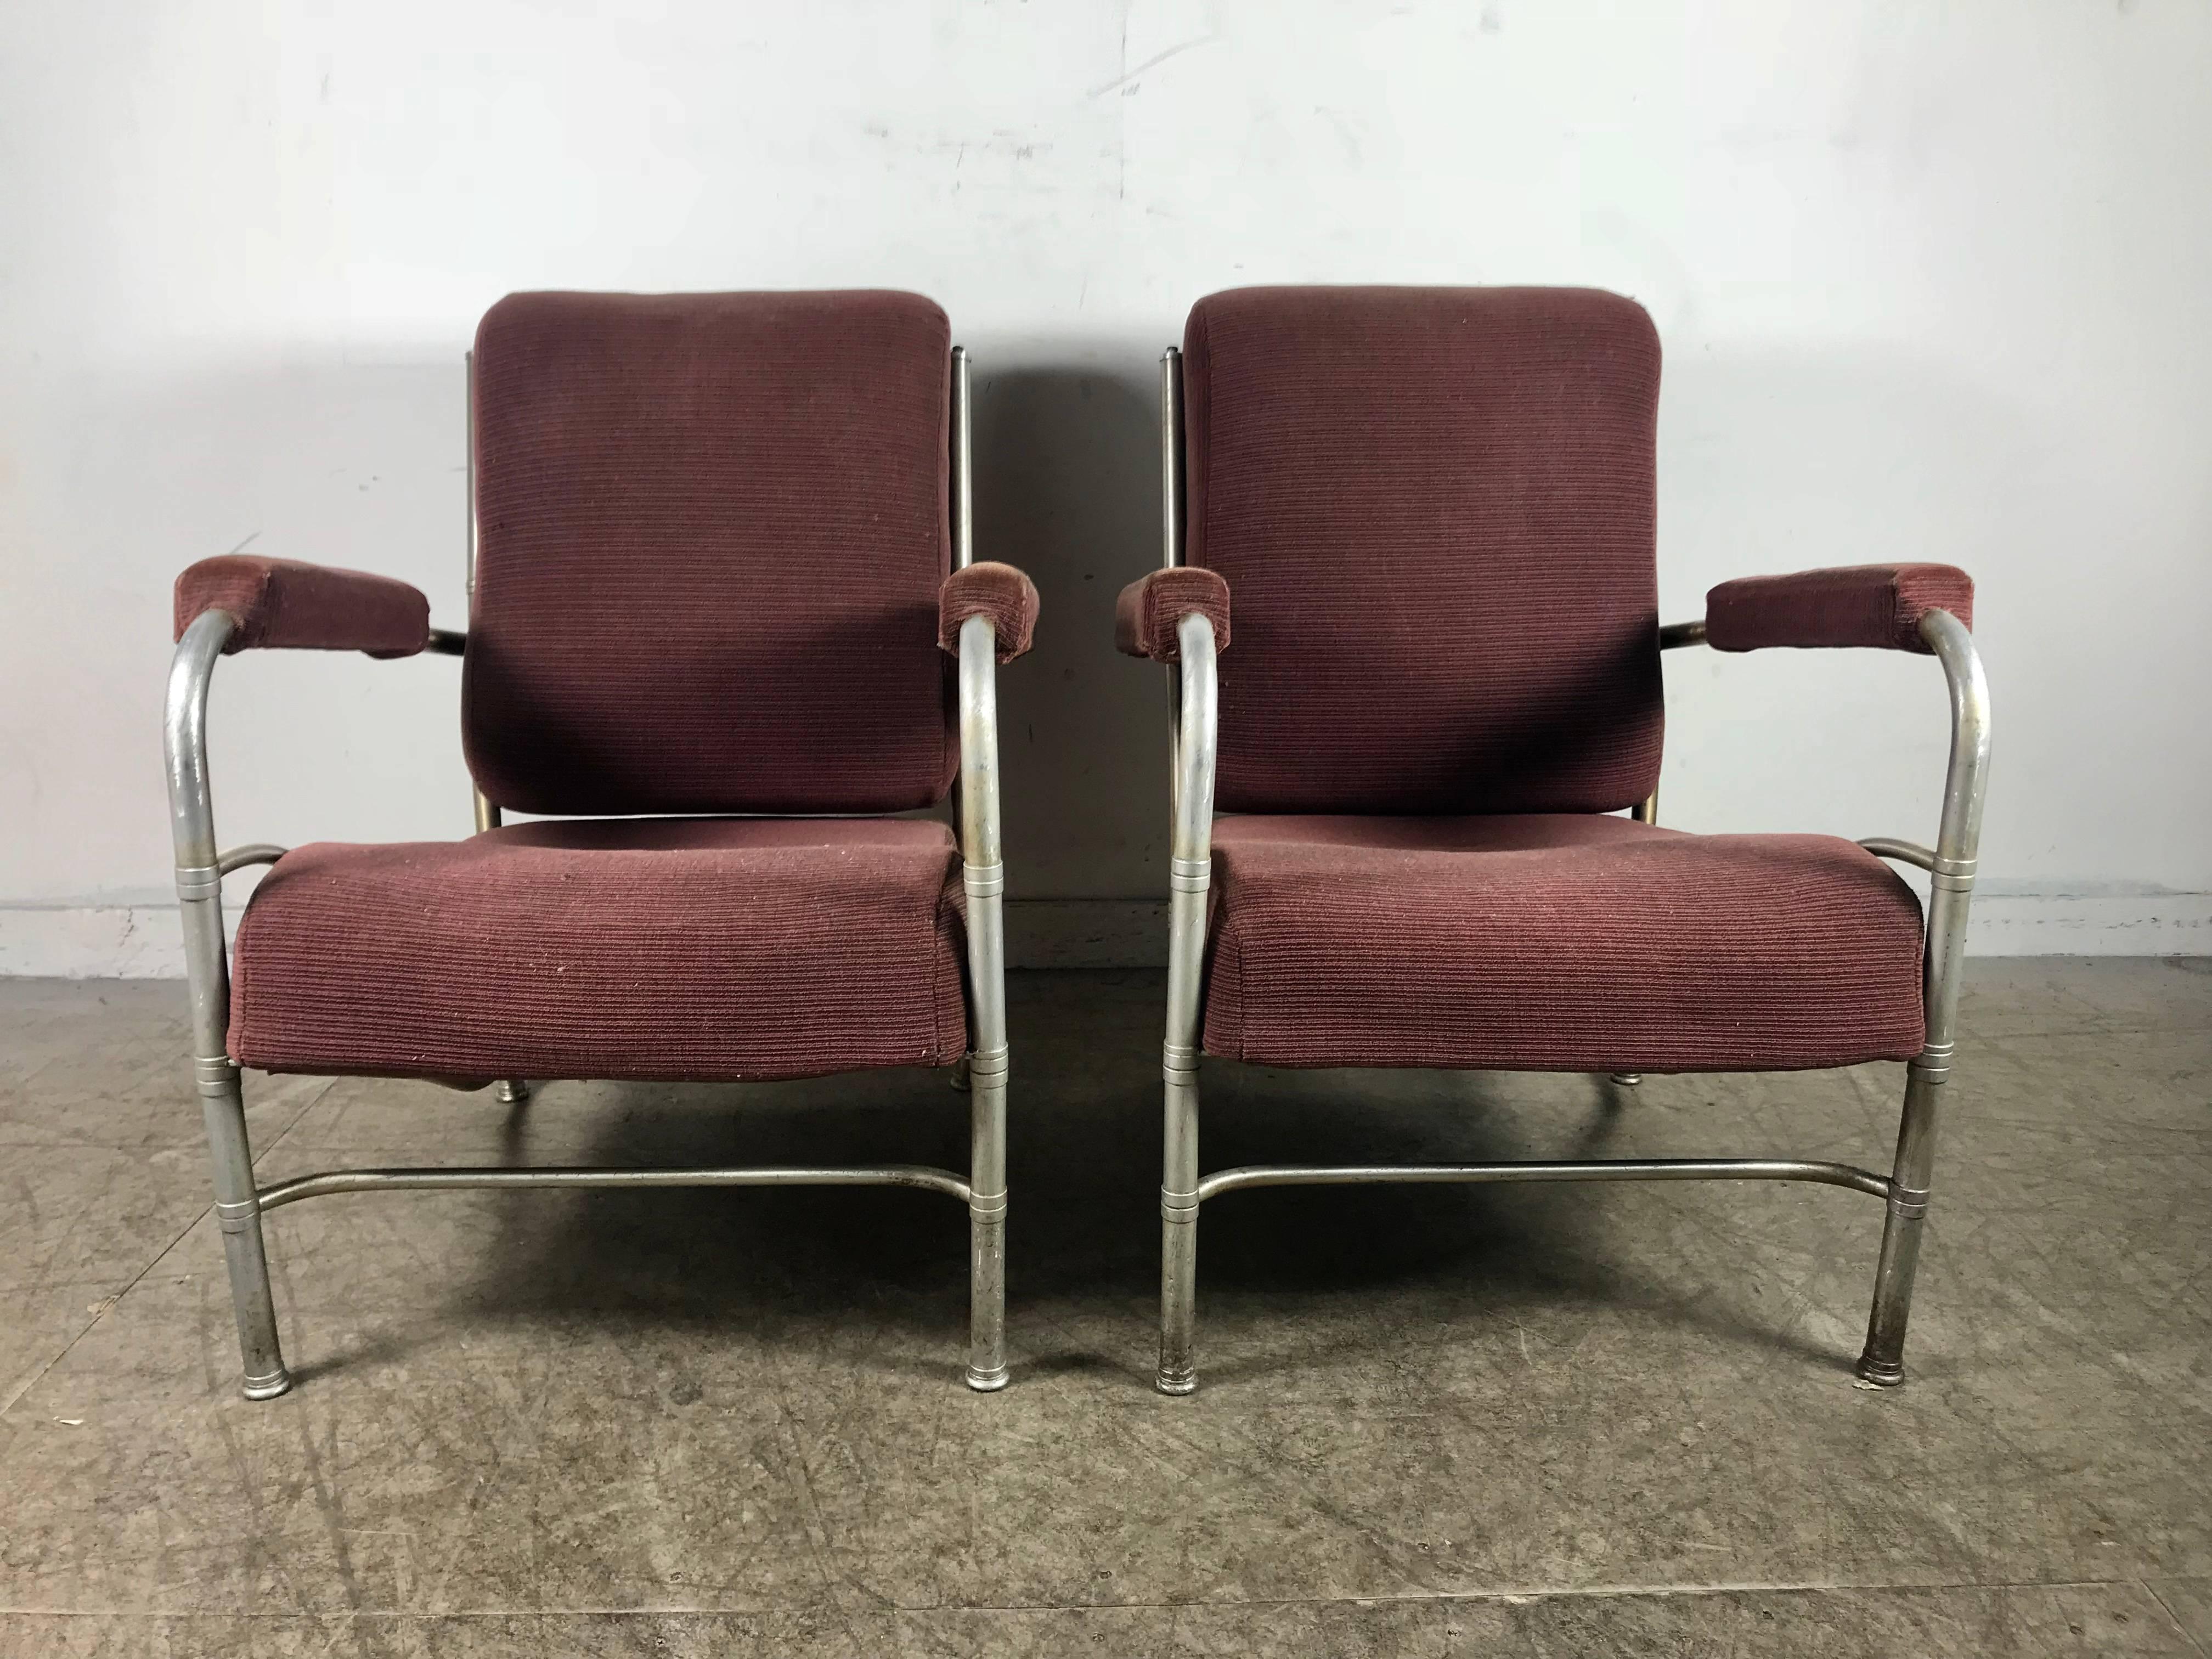 Matched pair of Art Deco. Machine Age aluminium lounge chairs by Warren McArthur, original unmolested condition, retains original cut mohair fabric upholstery as well as McArthur labels. Hand delivery avail to New York City or anywhere en route from